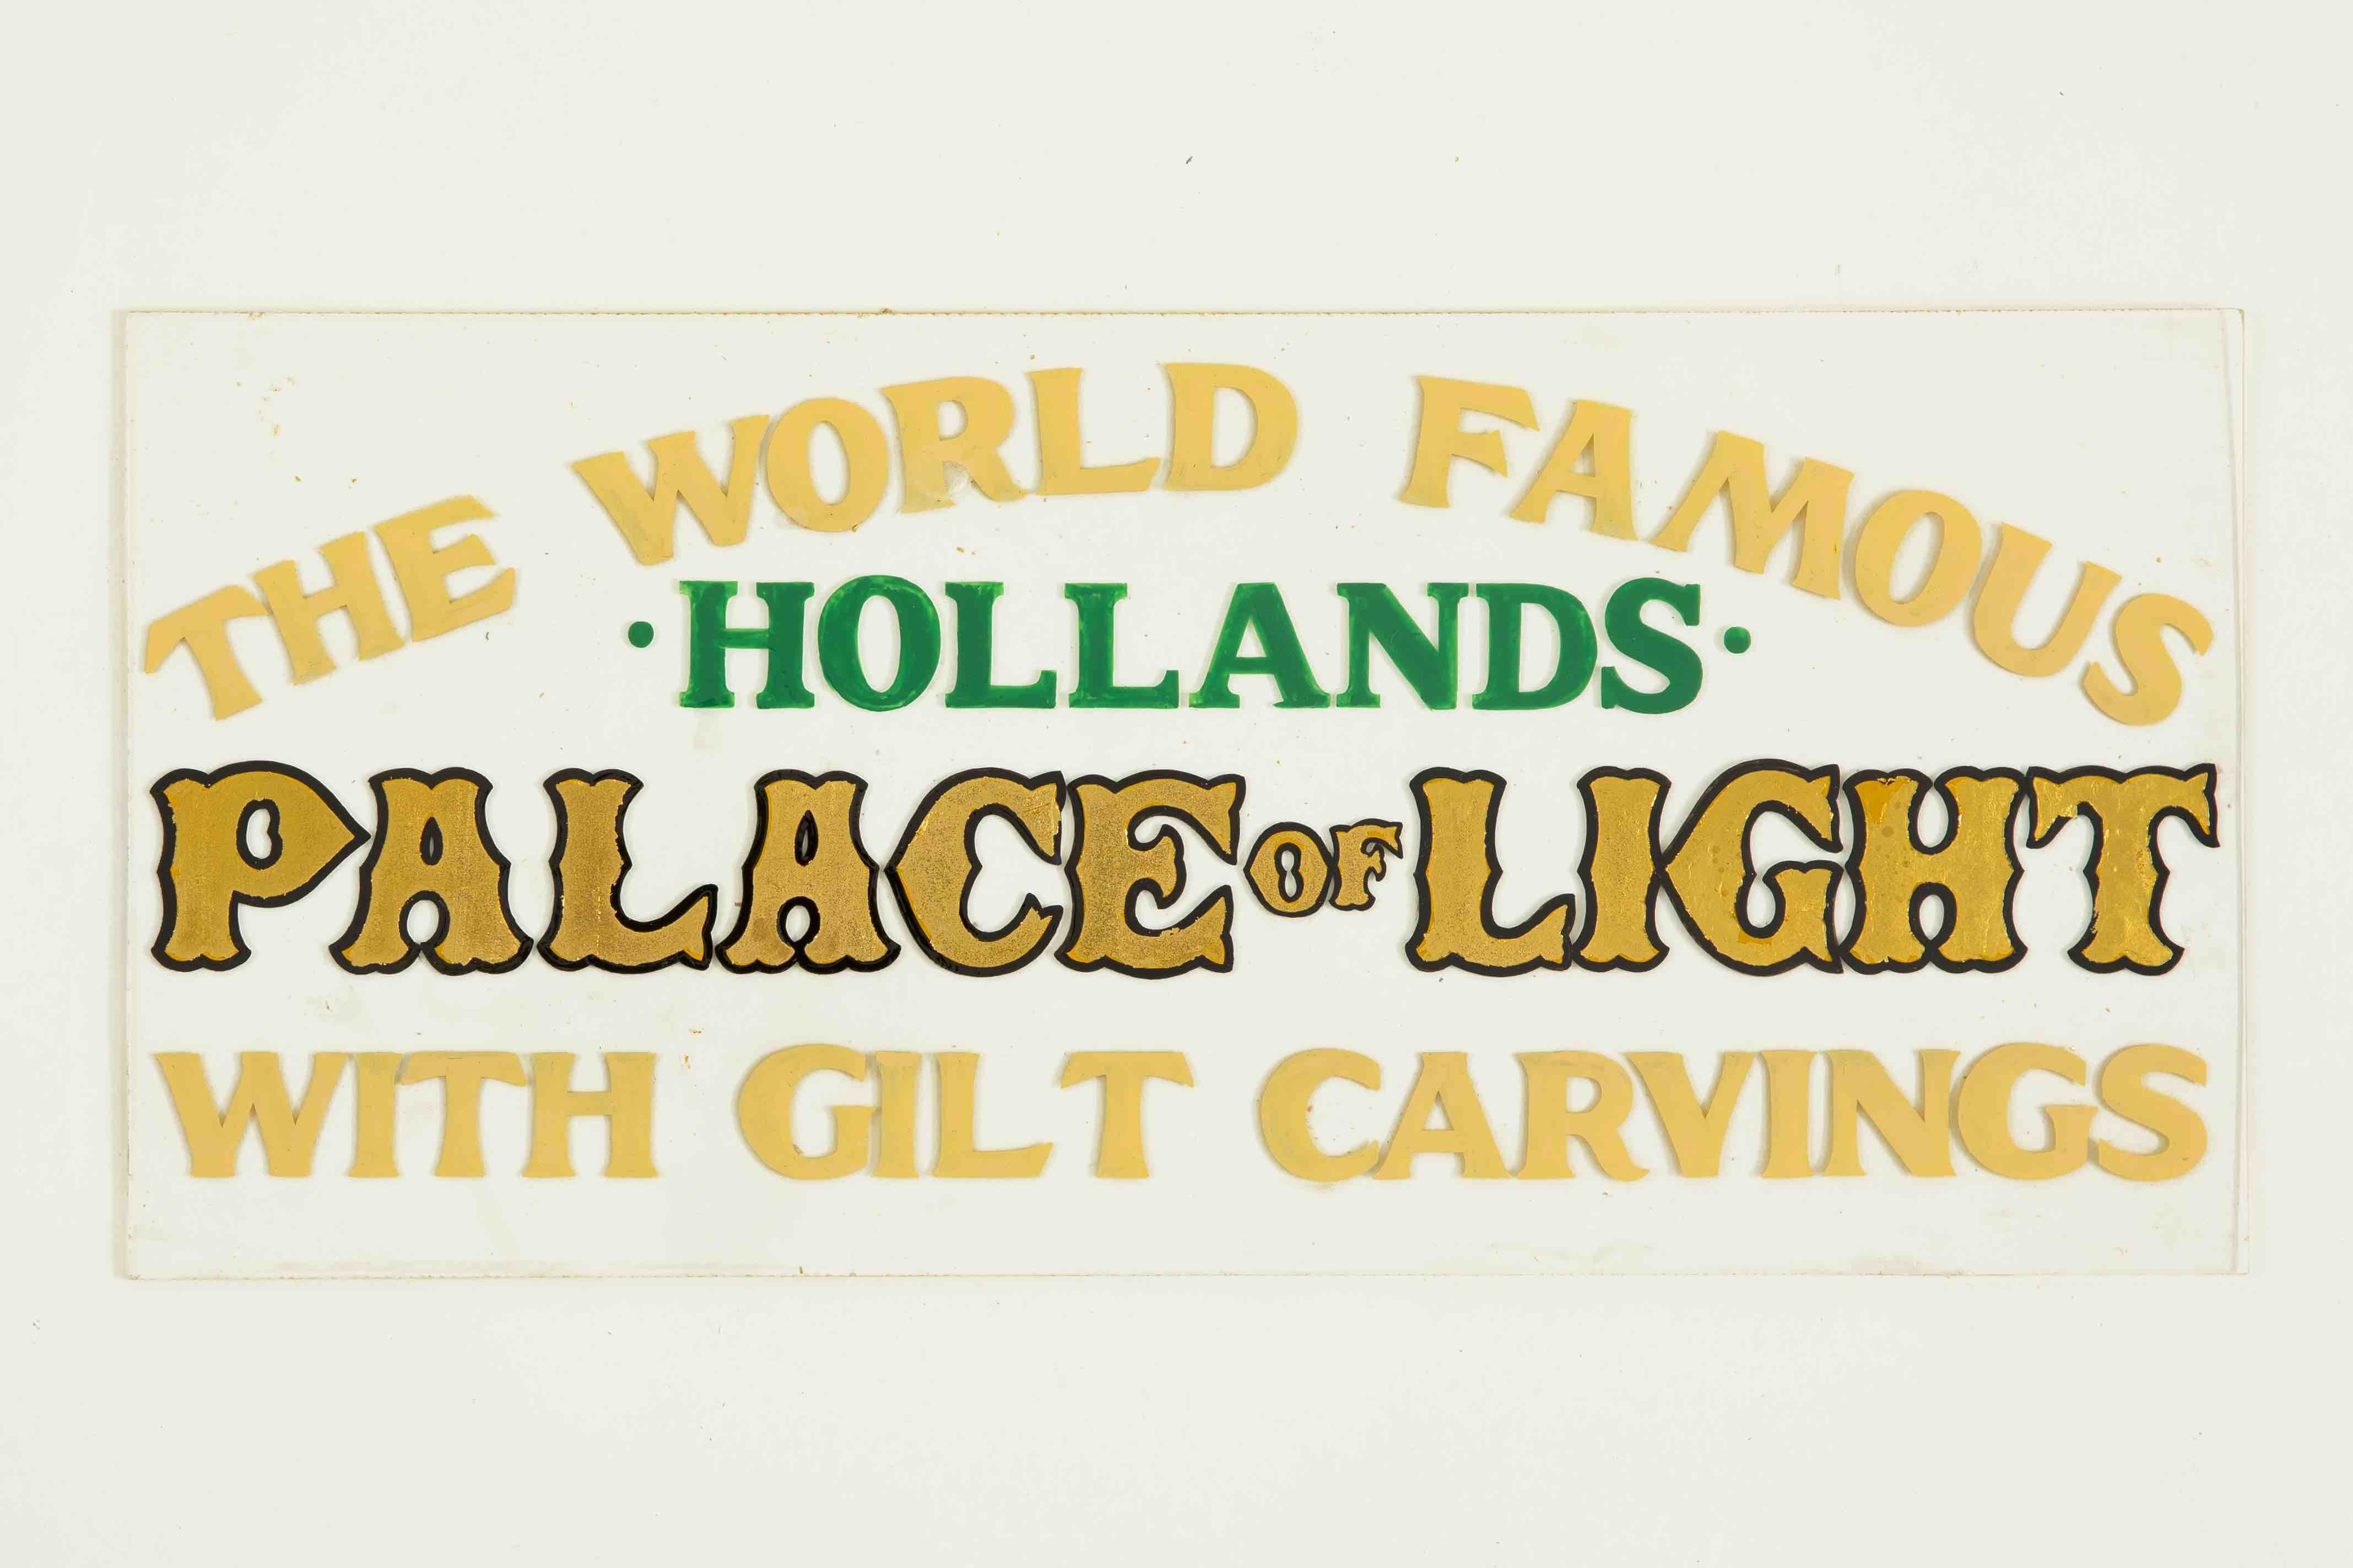 characterful hand-painted text: "The World Famous Hollands Palace of Light"